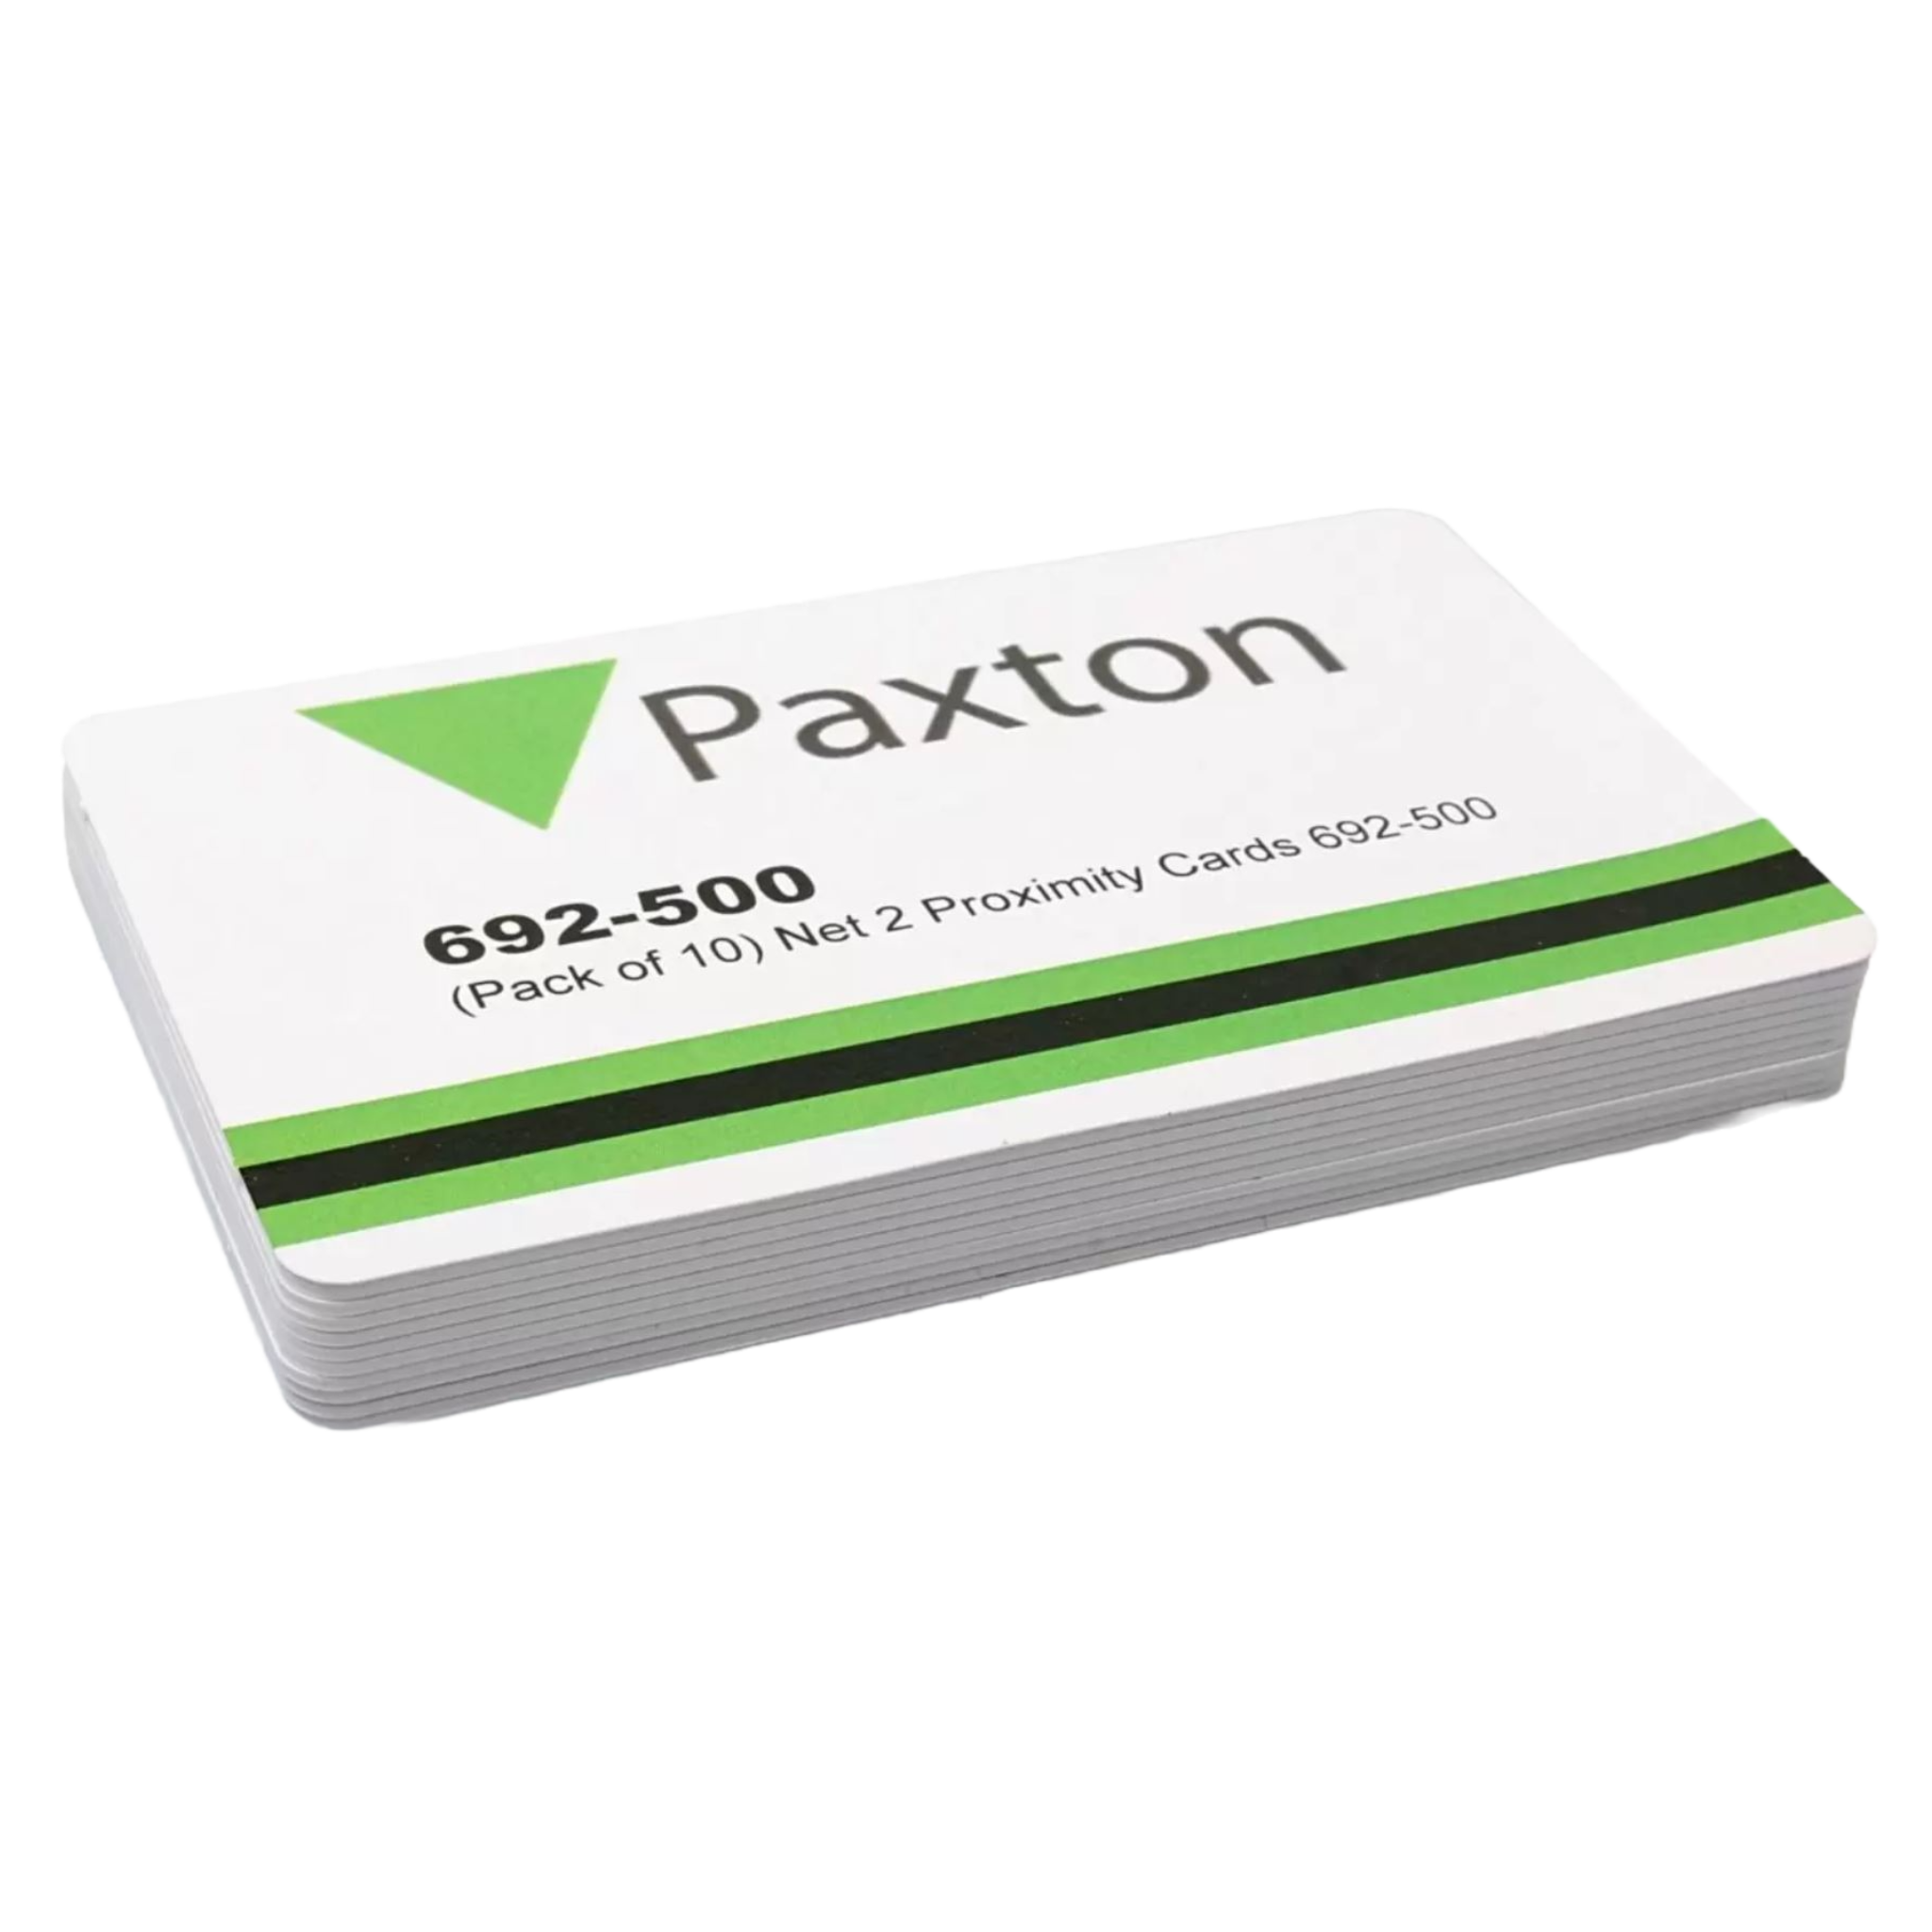 Paxton Net2 Cards 692-500, 10 Pack